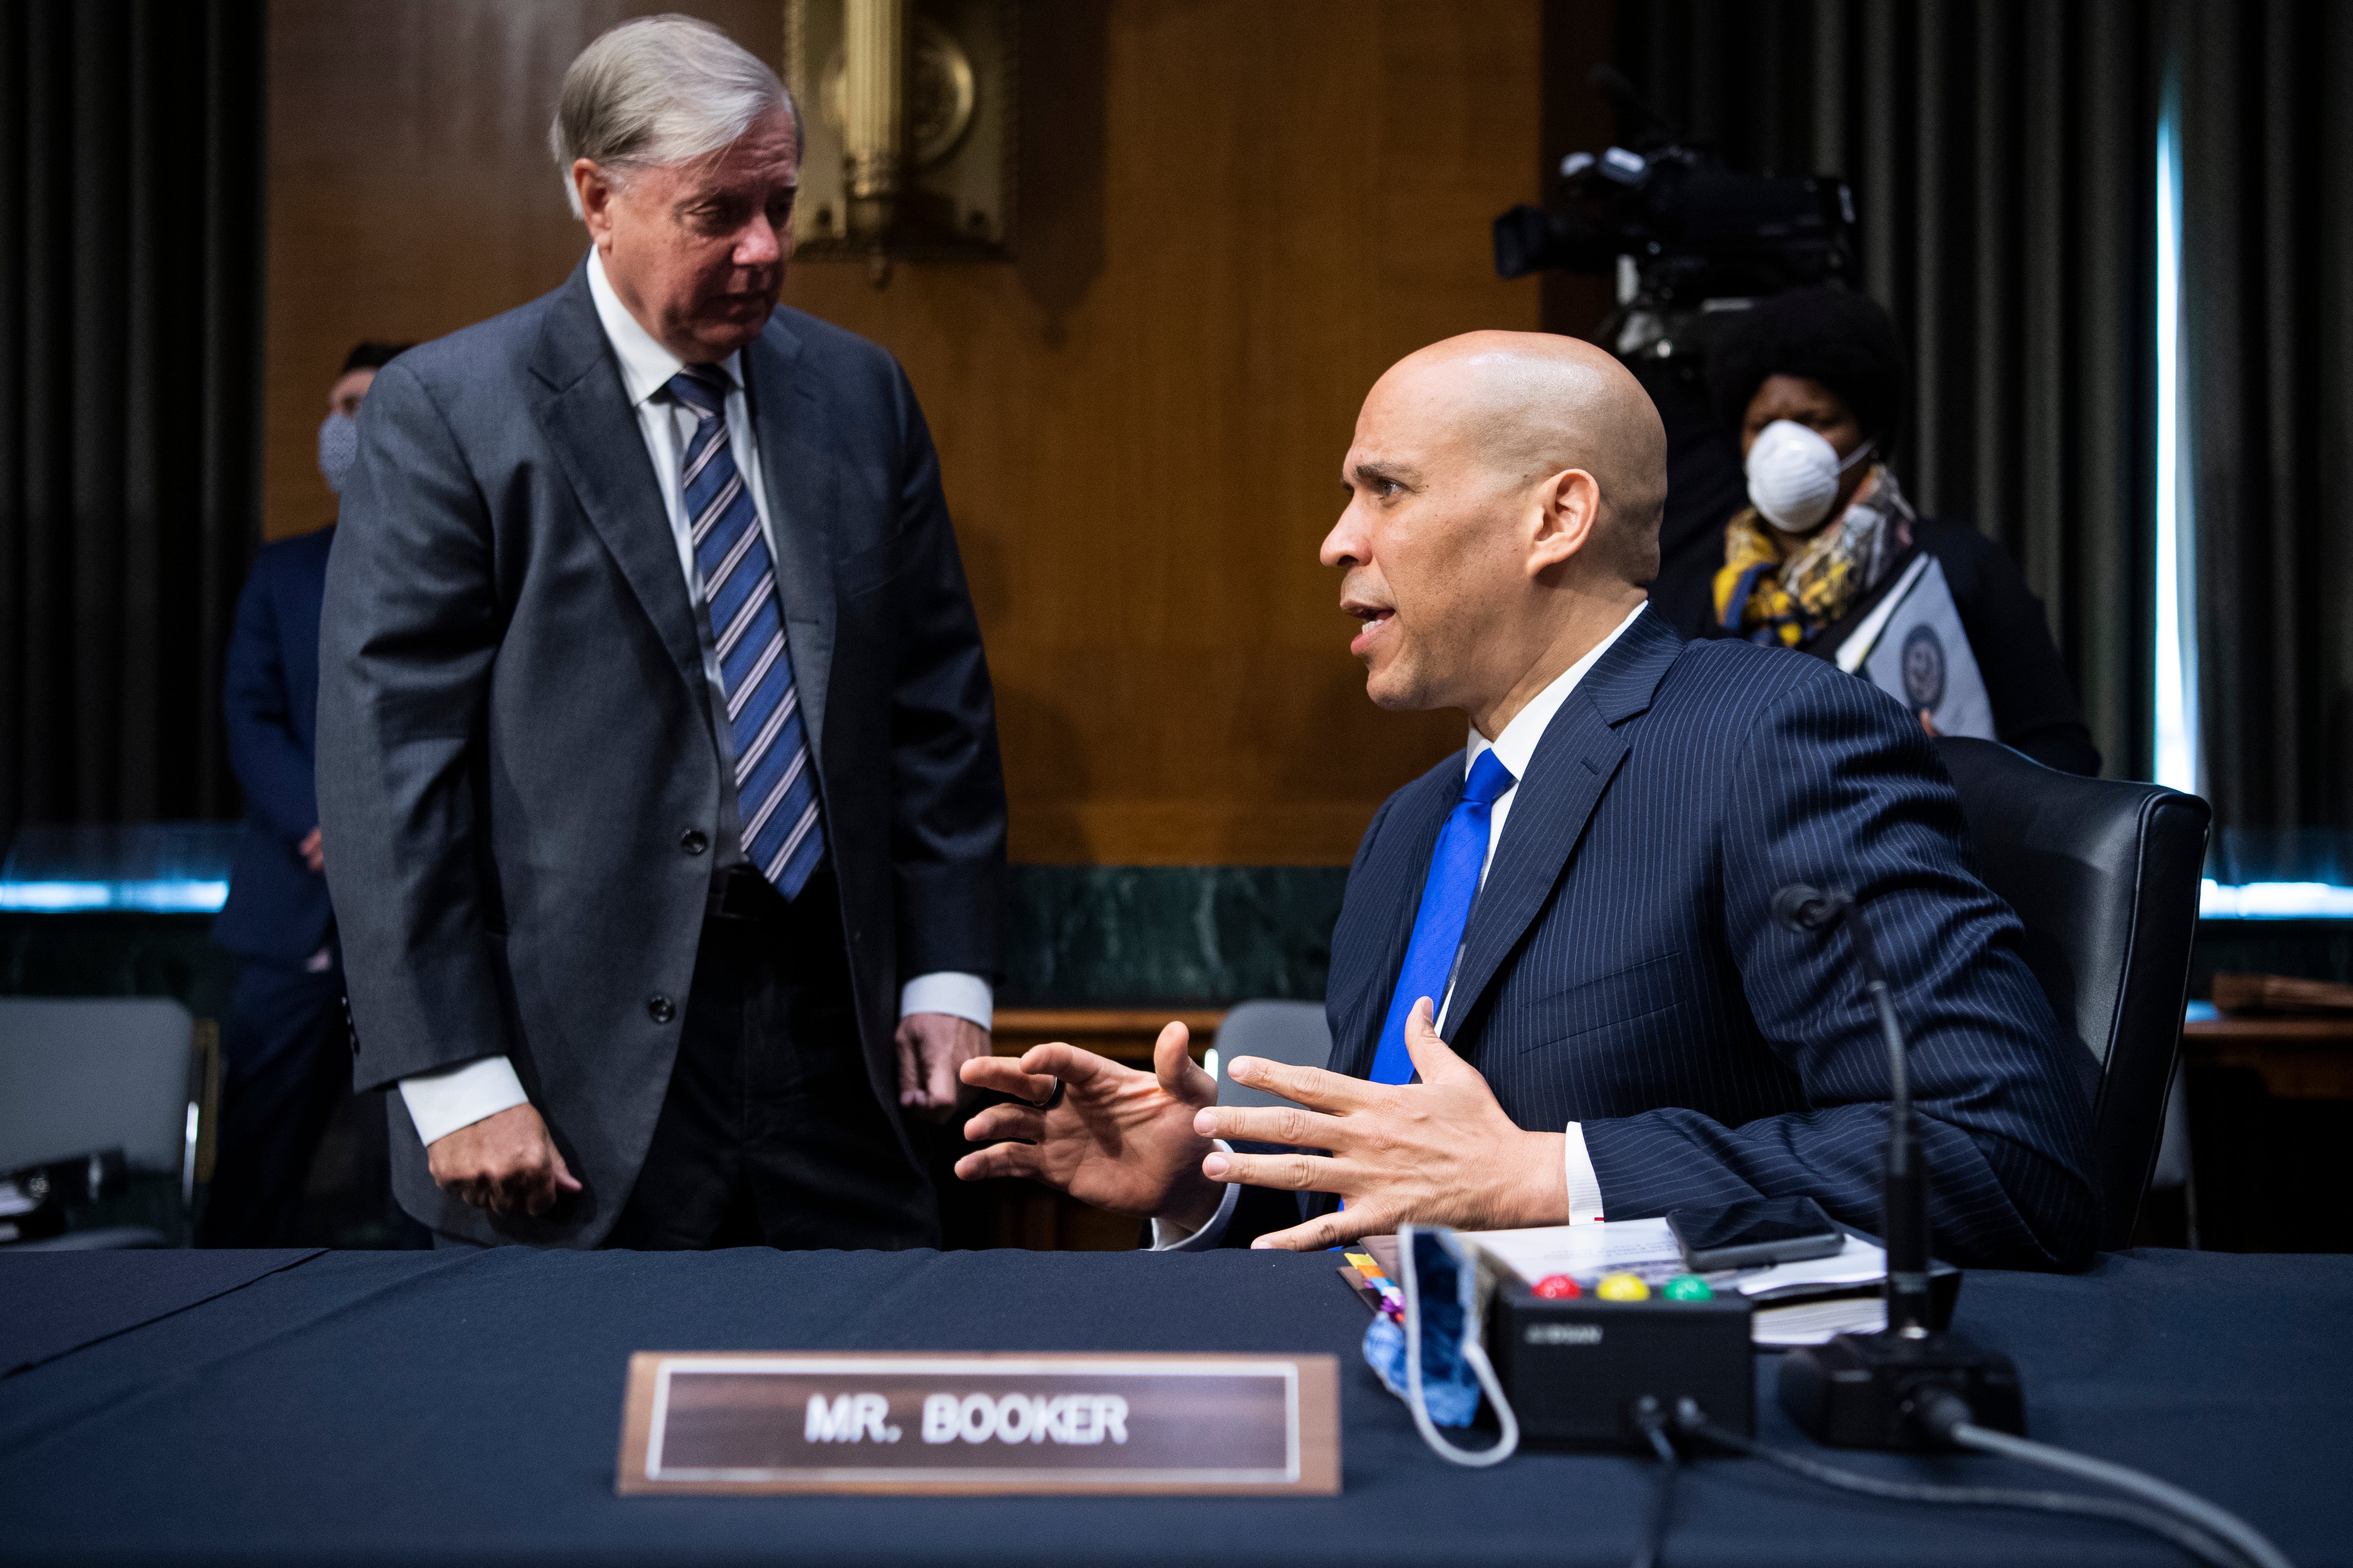 Republican Lindsey Graham and Democrat Cory Booker are from different sides of the political divide